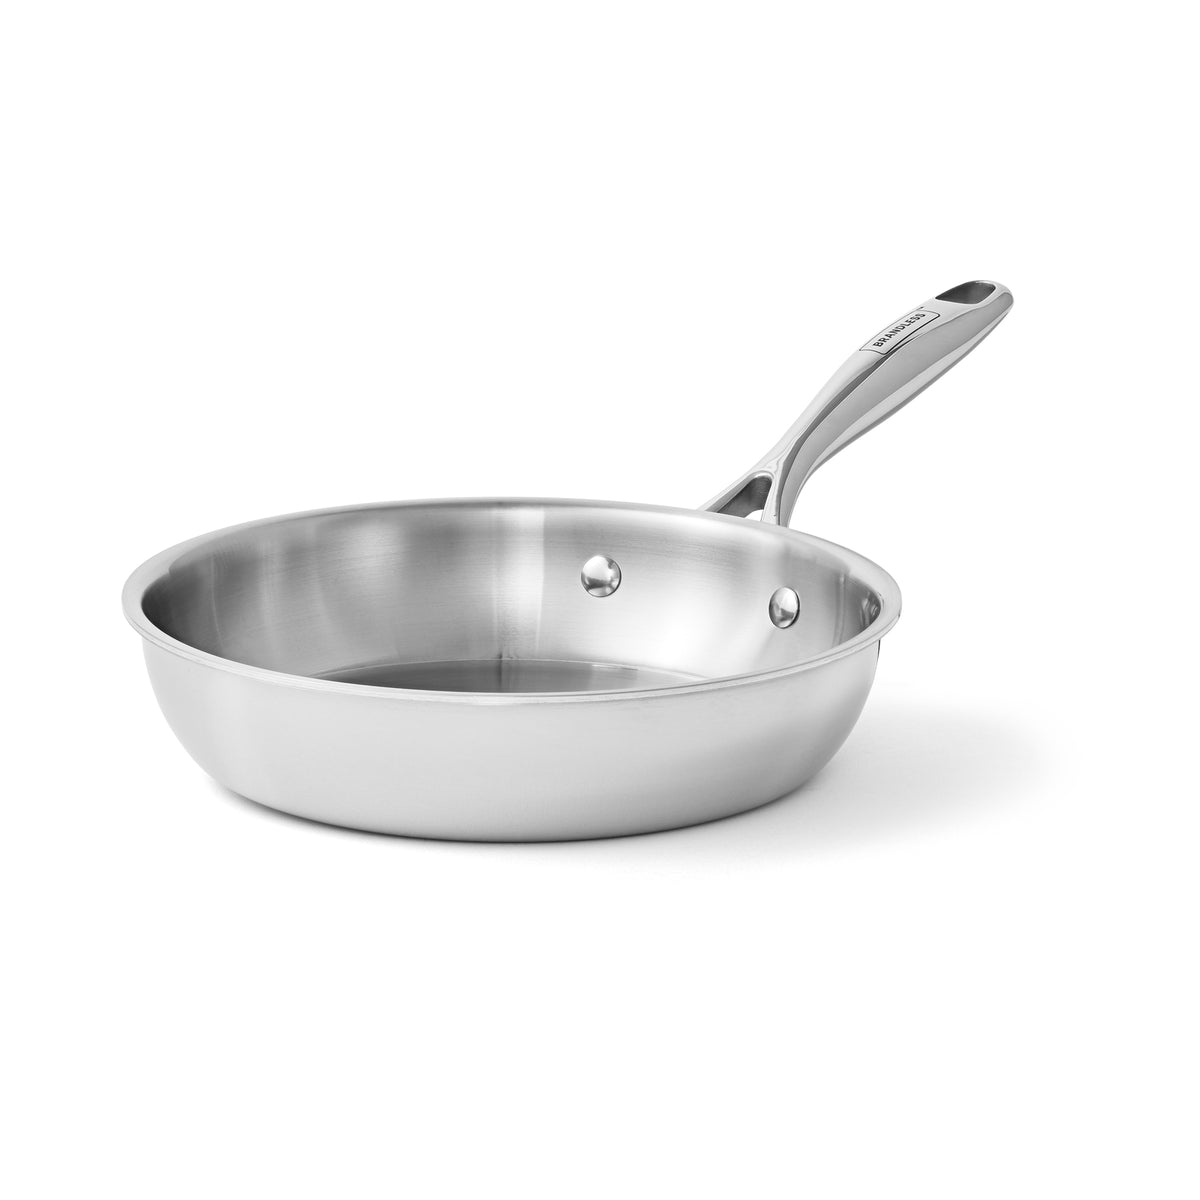 Product photo, 8 inch fry pan, 3/4 view.